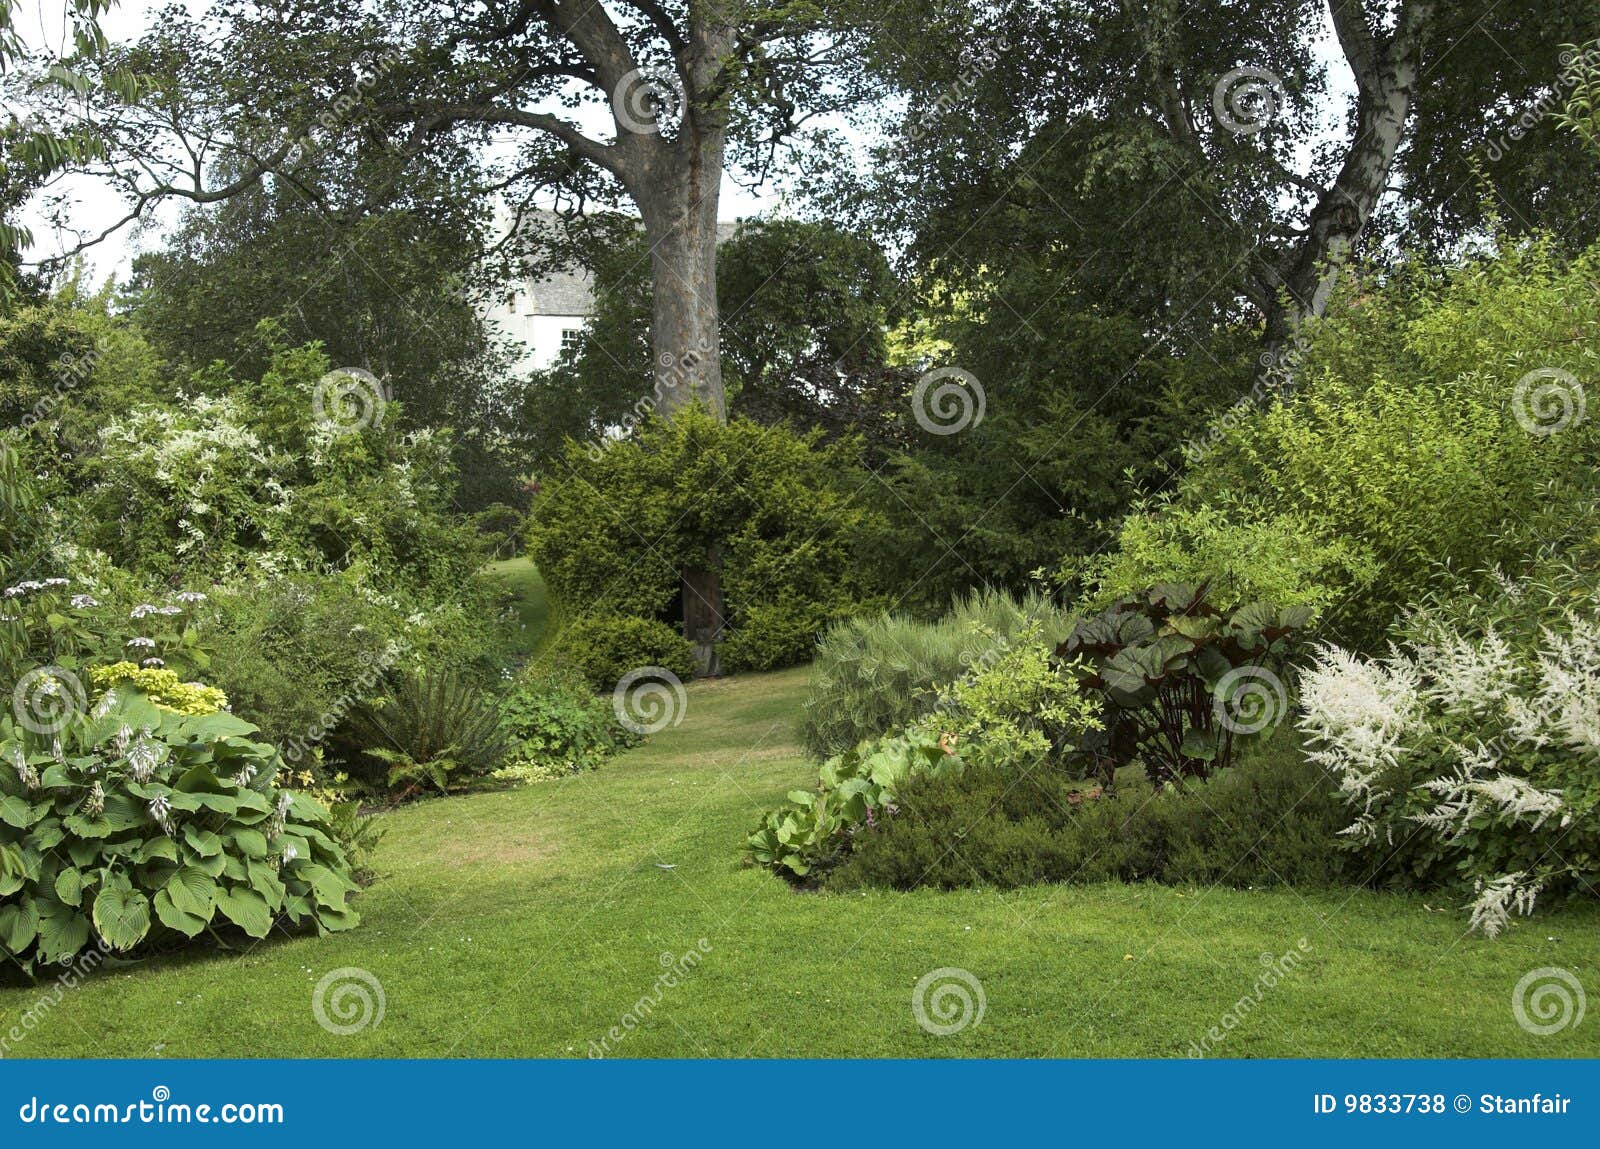 landscaped garden with trees shrubs